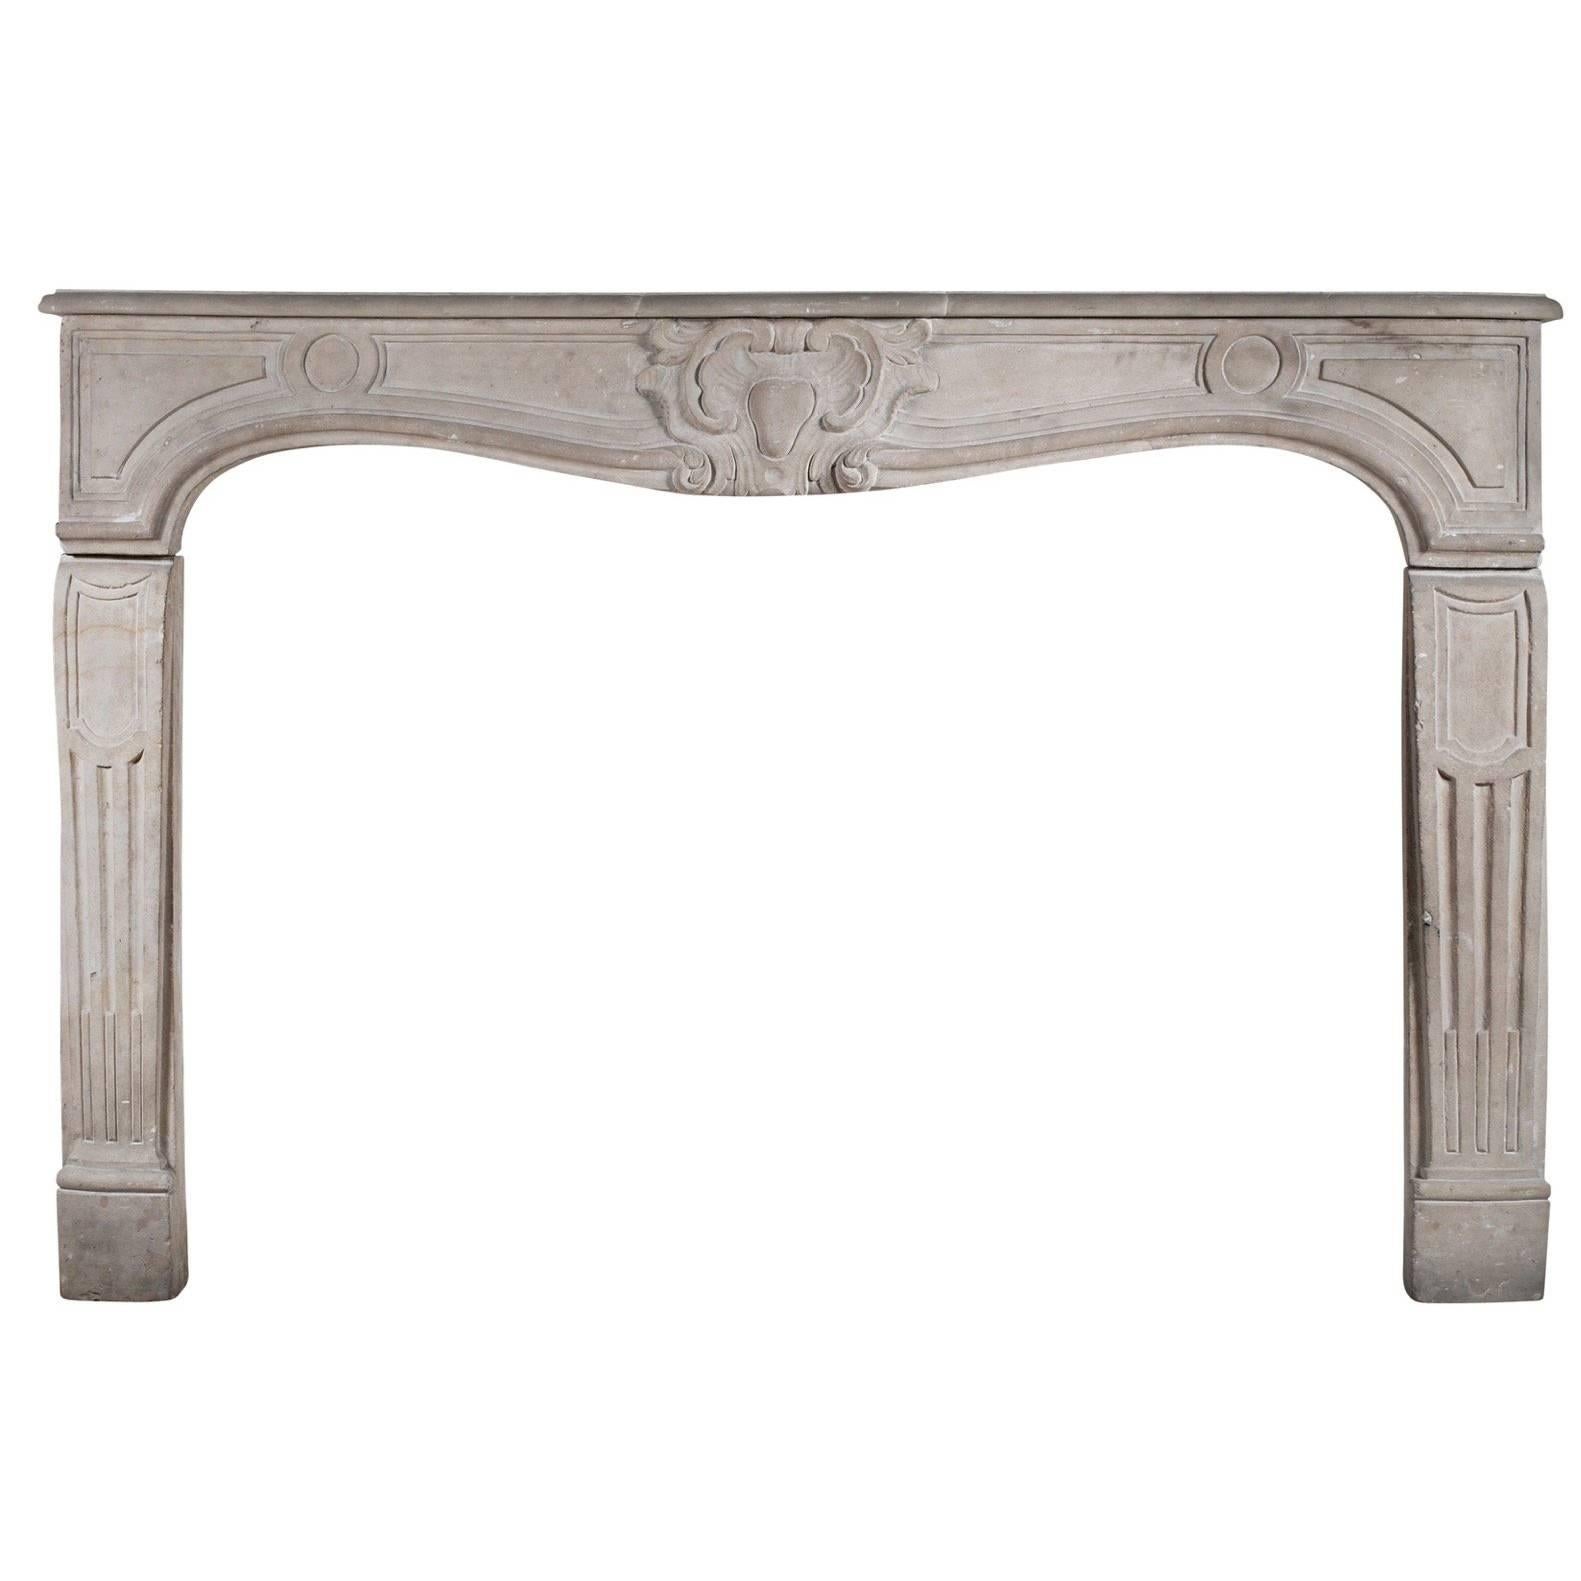 19th Century French Limestone Chimneypiece in the Louis XV Style